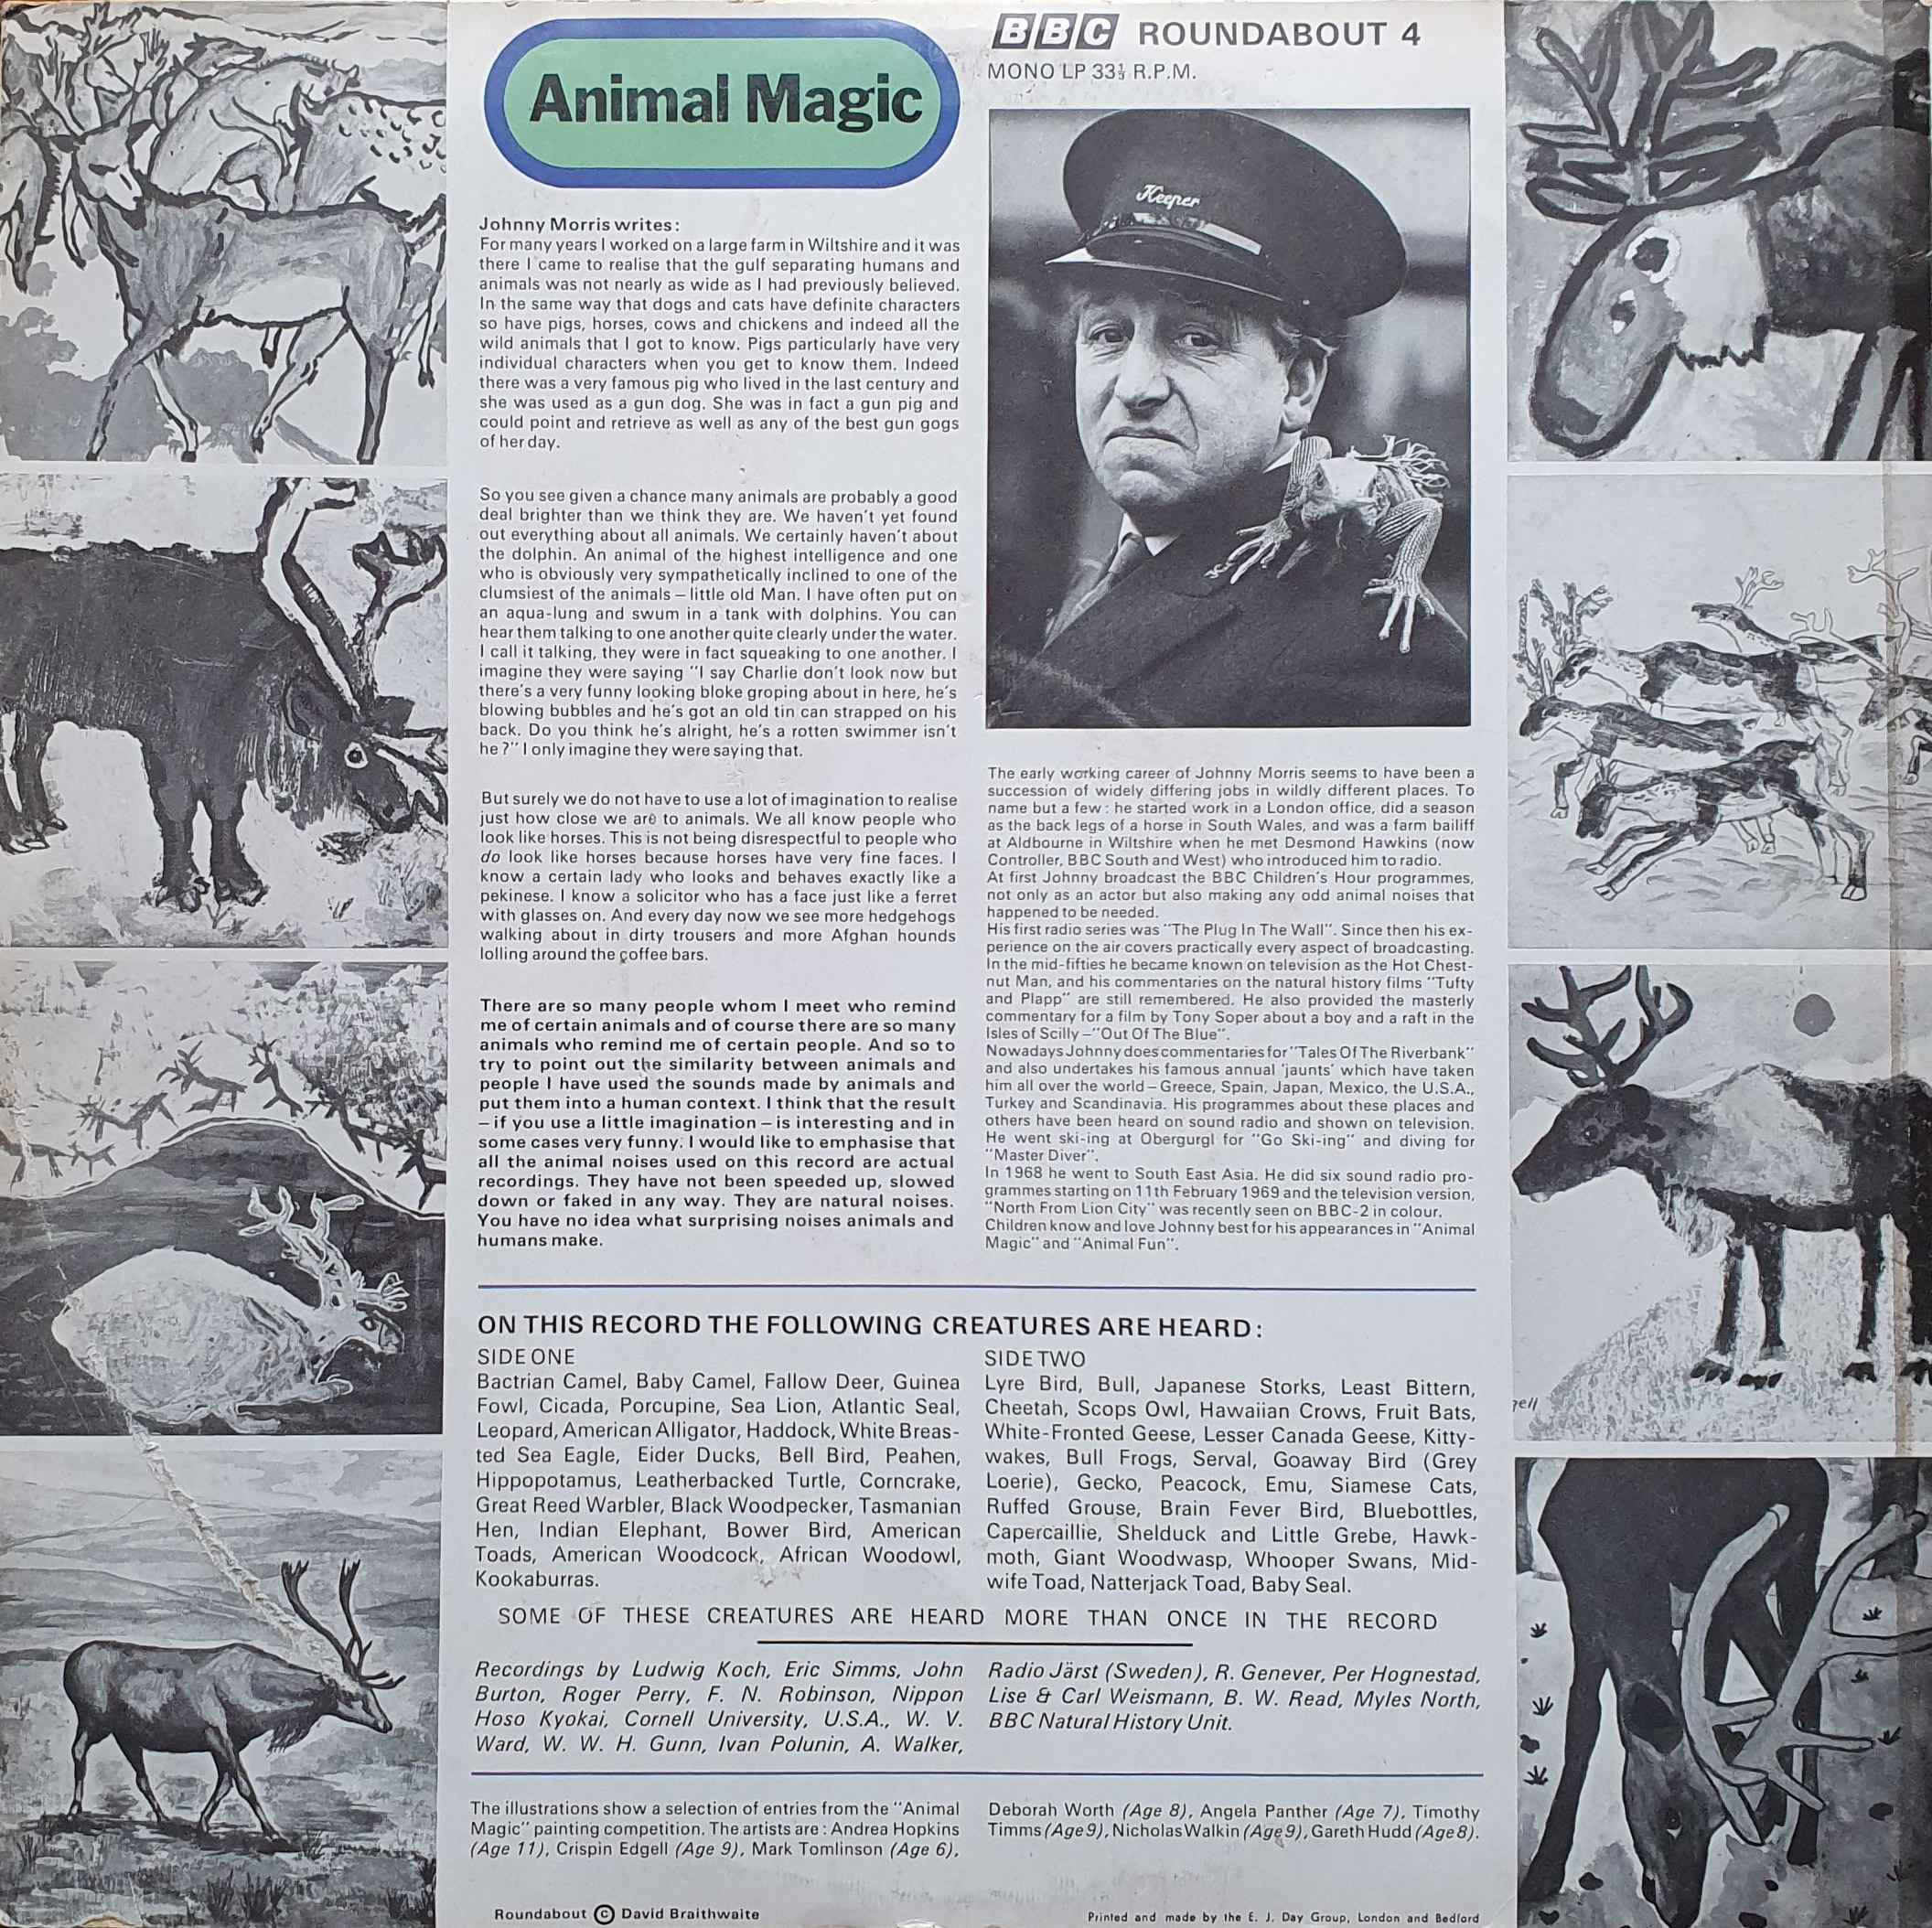 Picture of RBT 4 Animal magic by artist Johnny Morris from the BBC records and Tapes library